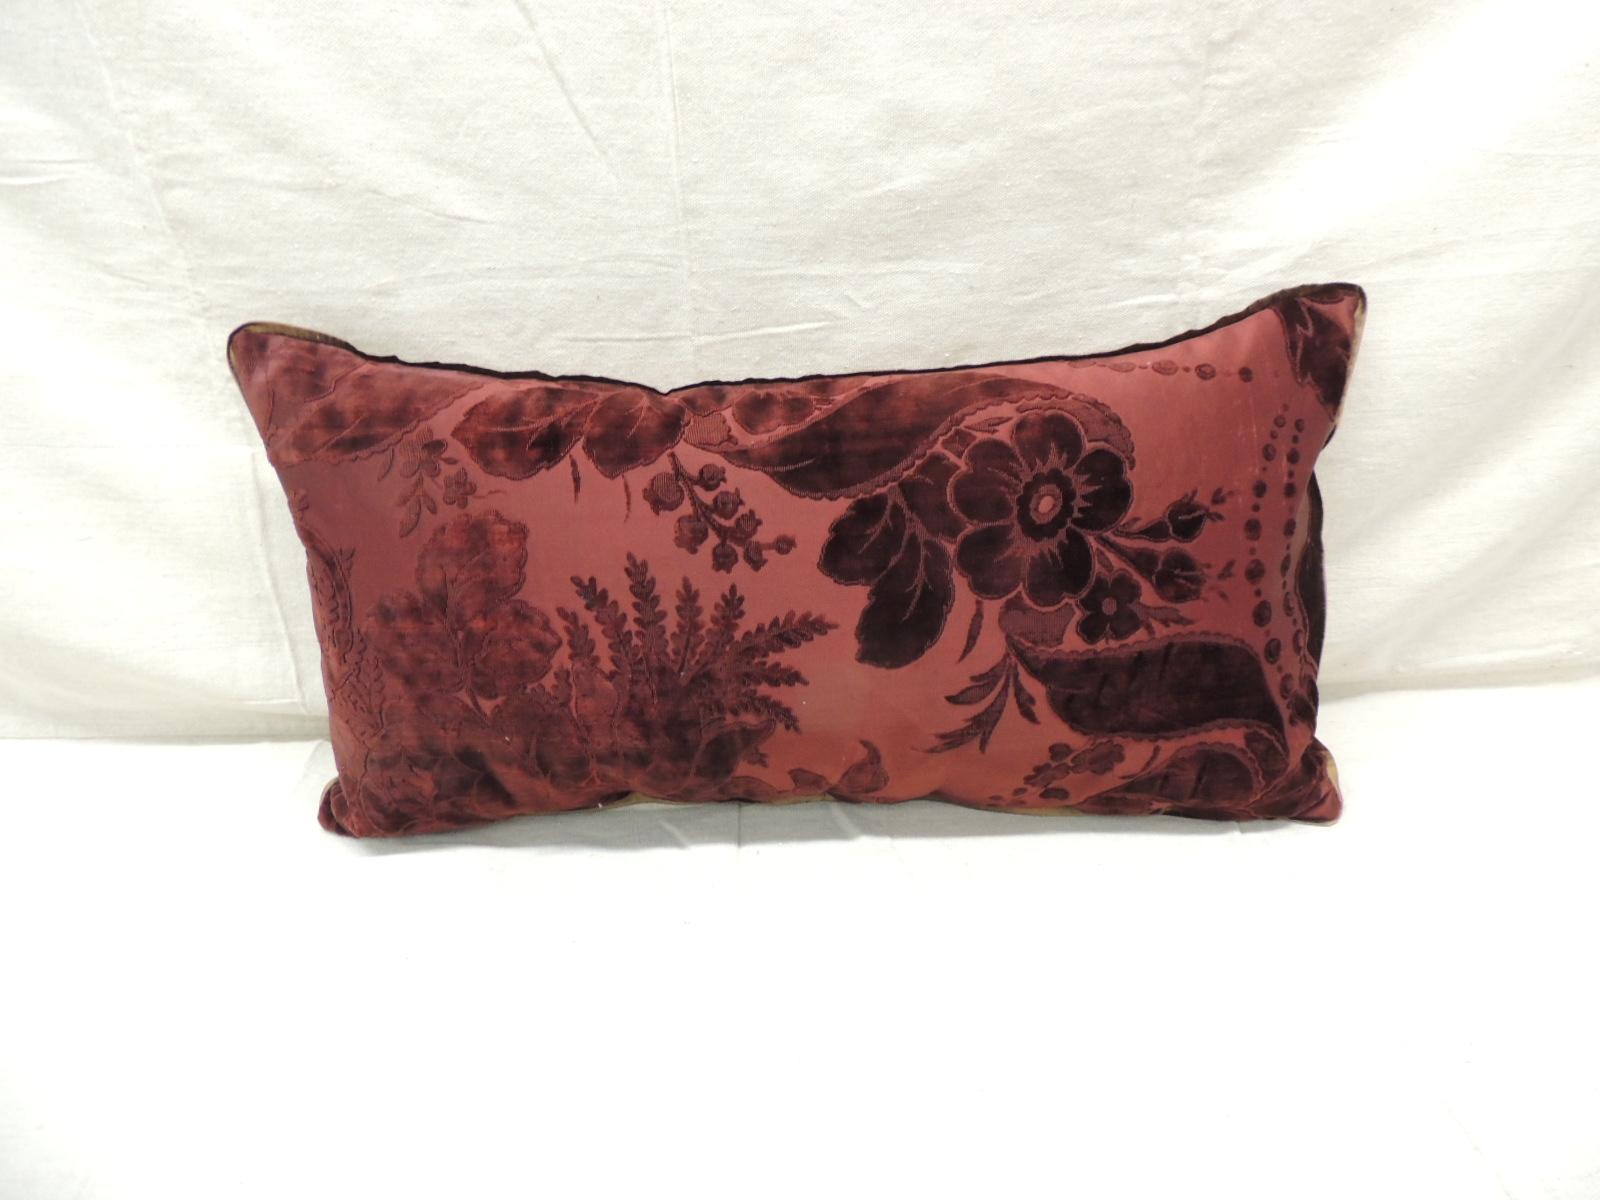 Antique burgundy floral silk velvet long Bolster decorative pillow.
Gaufrage velvet bolster with golden silk ATG custom trim and golden silk backing.
Decorative pillow handcrafted and designed in the USA. 
Closure by stitch (no zipper closure)